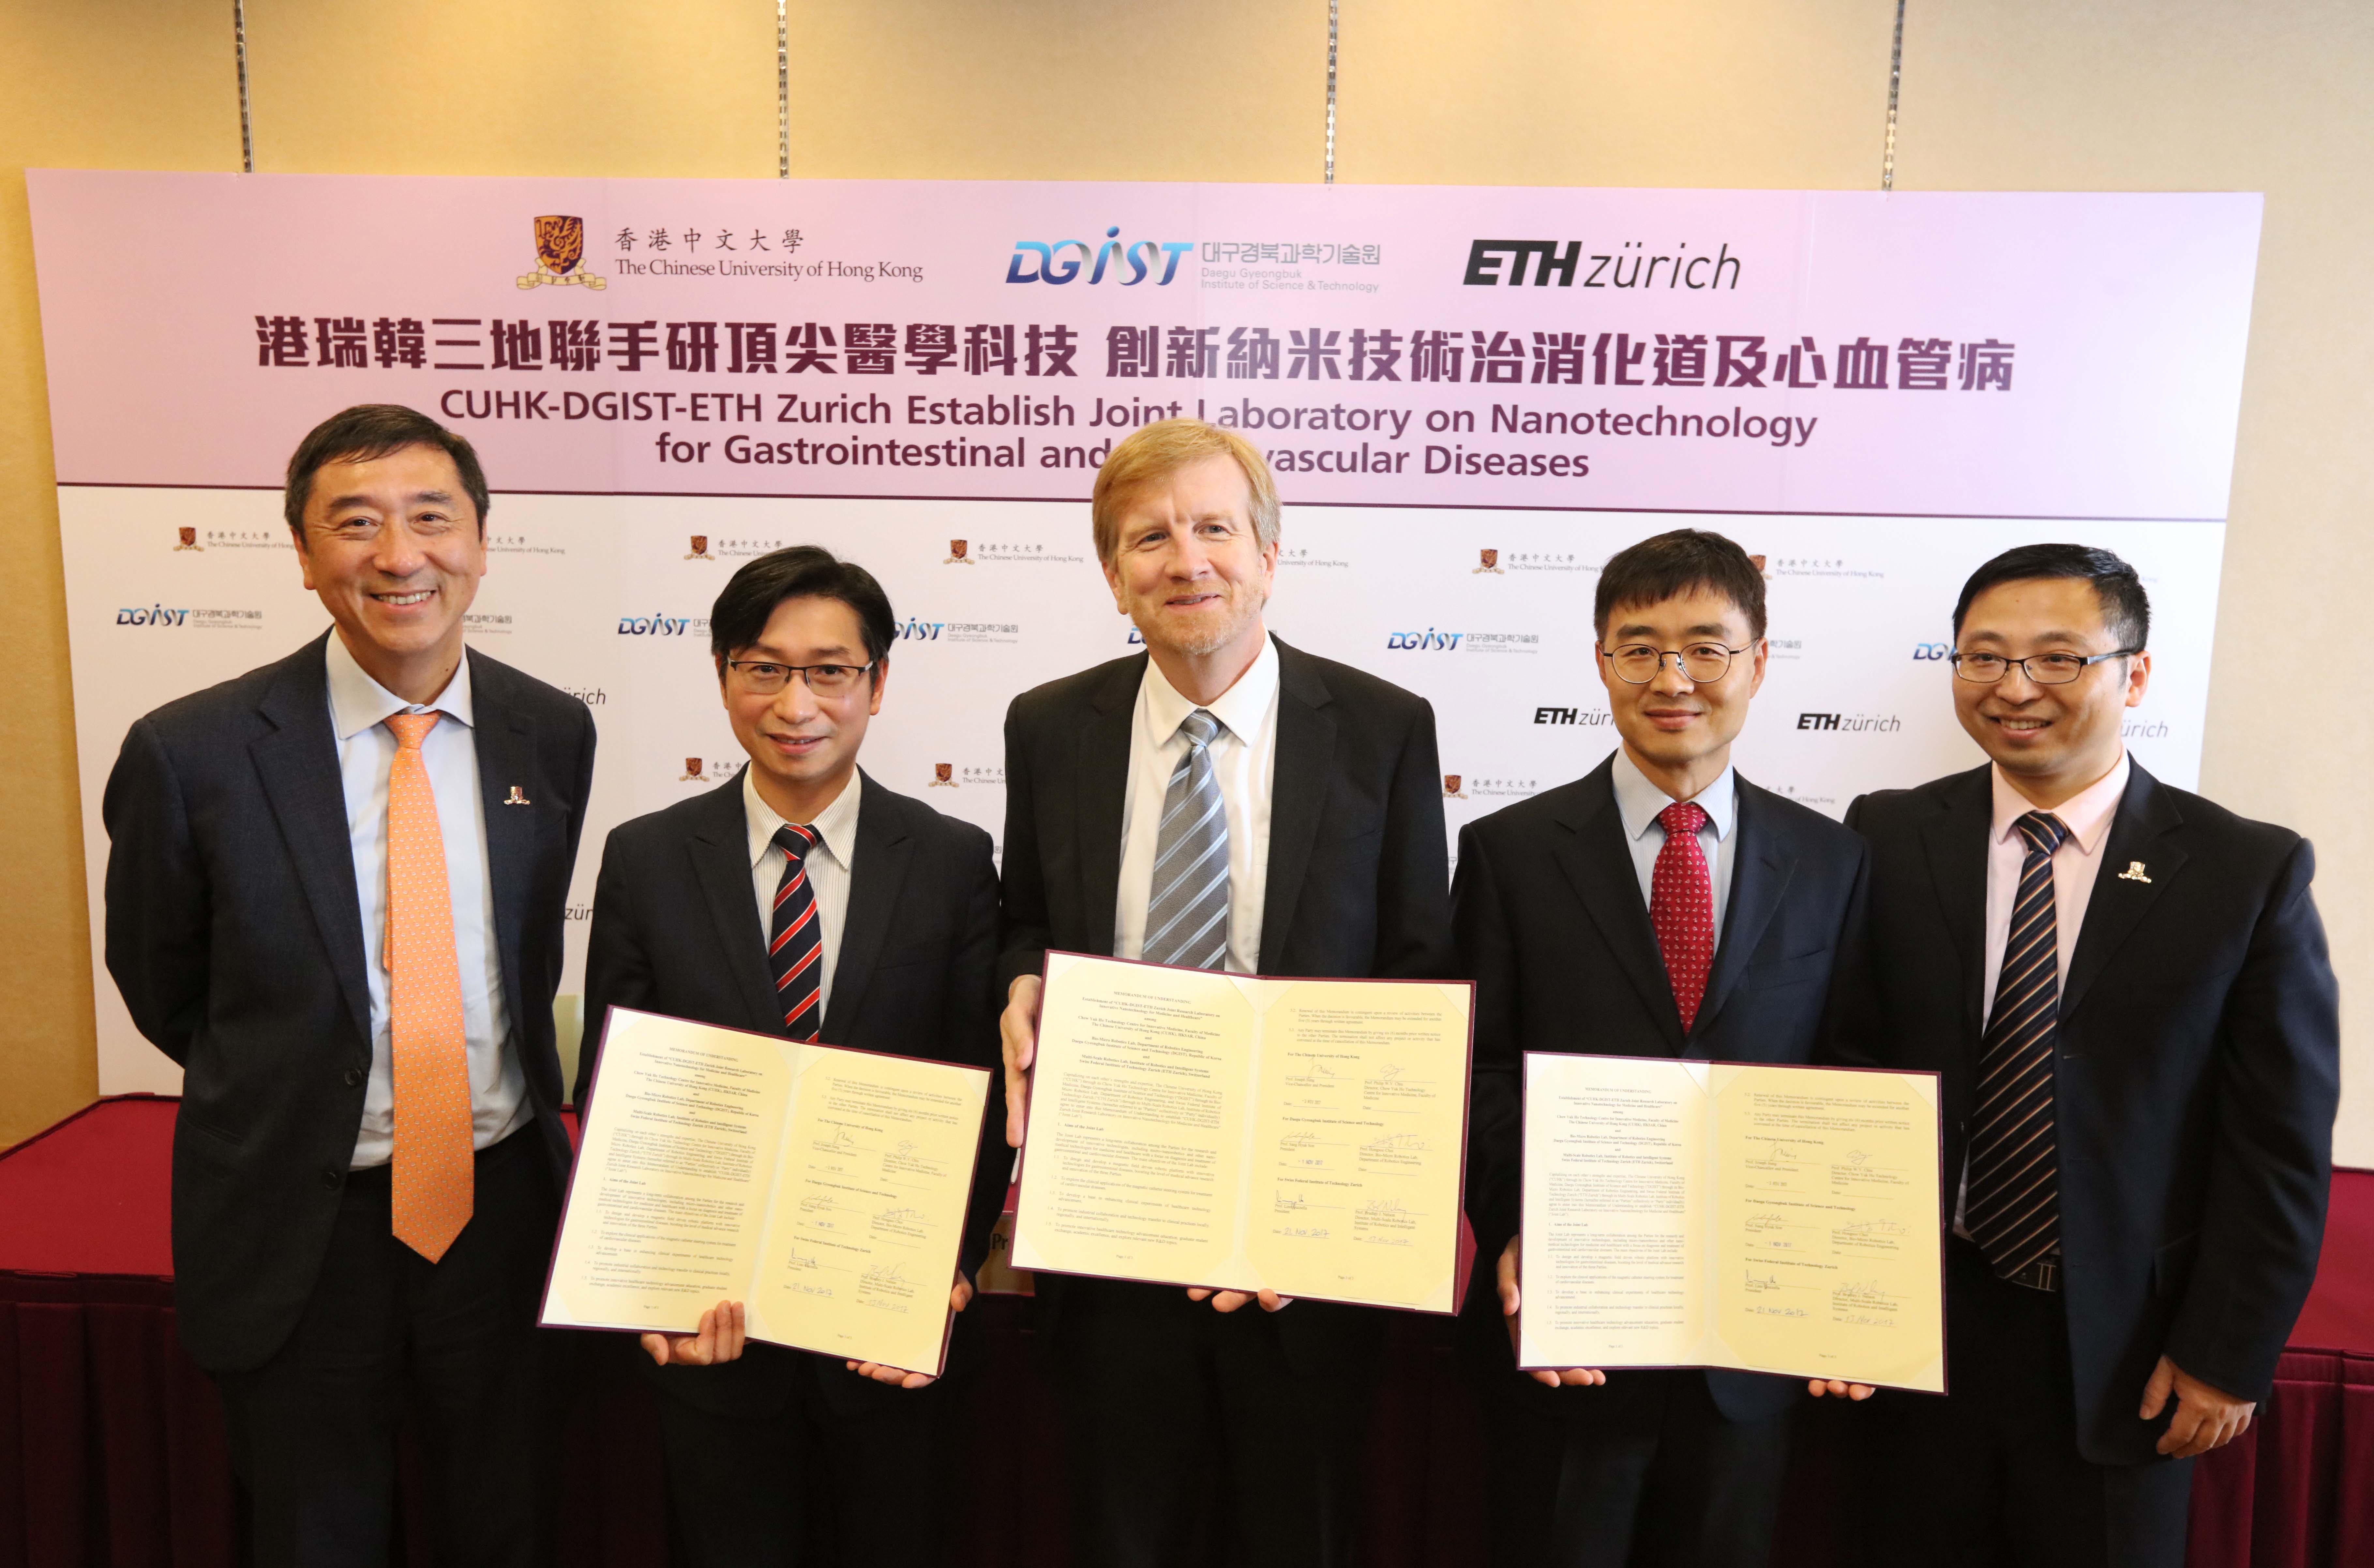 (From left) Prof. Joseph SUNG, Vice-Chancellor and President of CUHK; Prof. Philip CHIU, Director of the Chow Yuk Ho Technology Centre for Innovative Medicine, CUHK; Prof. Dr. Bradley NELSON, Director of the Multi-Scale Robotics Lab, Institute of Robotics and Intelligent Systems, ETH Zurich; Prof. Hongsoo CHOI, Director of the Bio-Micro Robotics Lab, Department of Robotic Engineering, DGIST and Prof. Li ZHANG, Associate Professor, Department of Mechanical and Automation Engineering, CUHK, take a group photo after signing the MOU to establish a Joint Research Laboratory on Innovative Nanotechnologies for Medicine and Healthcare